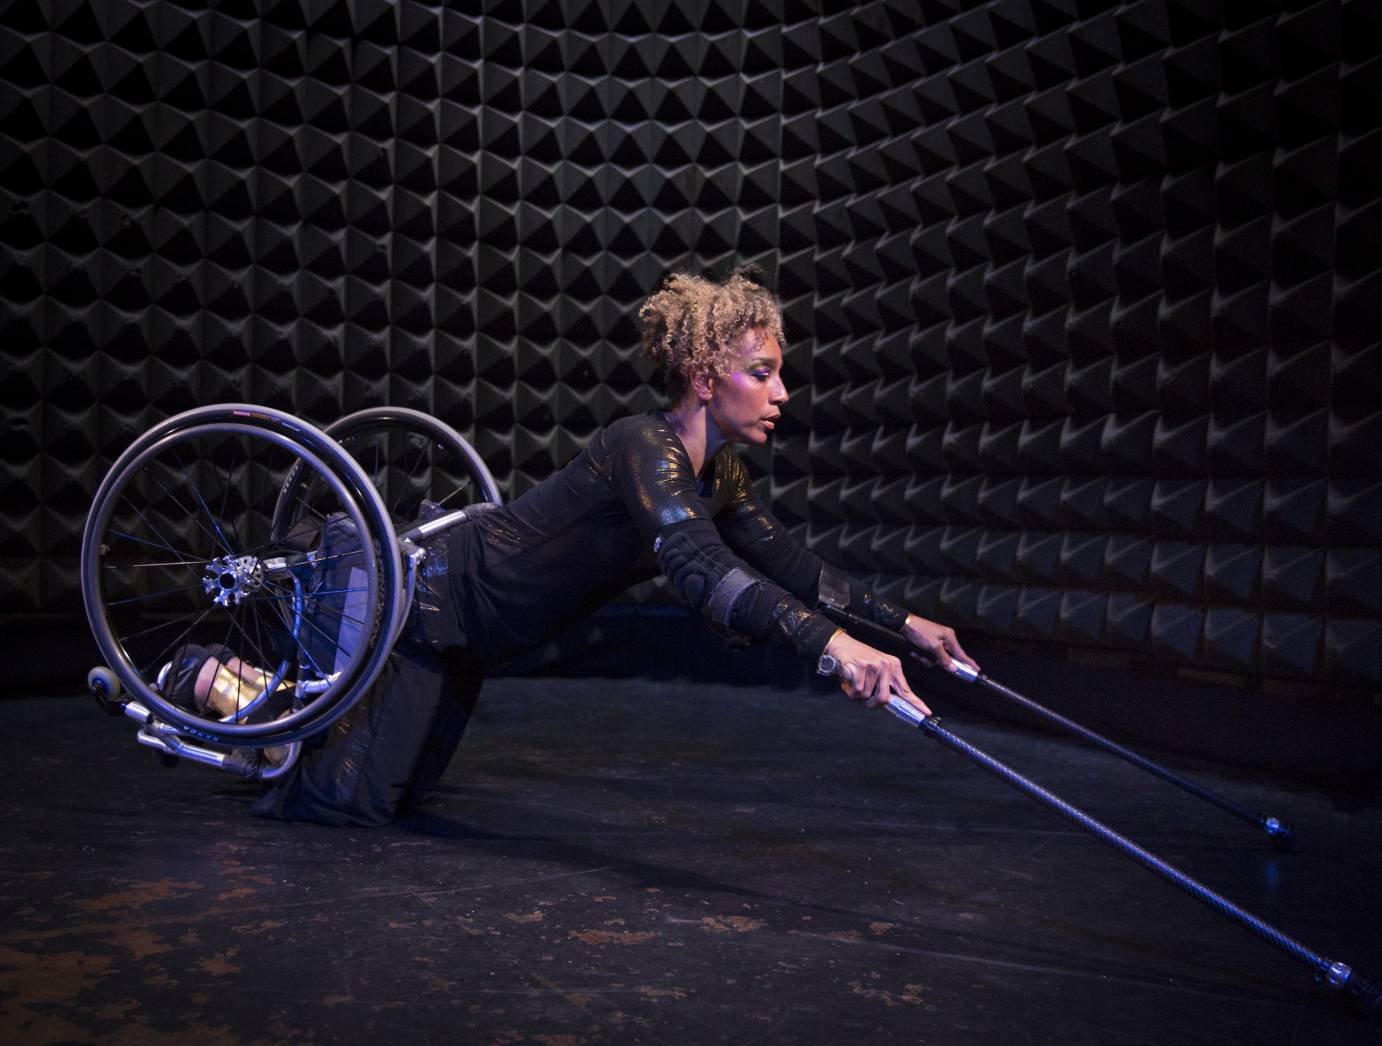 In a wheelchair, a woman balances on her knees. Her arms are extended, and she holds two sticks. 